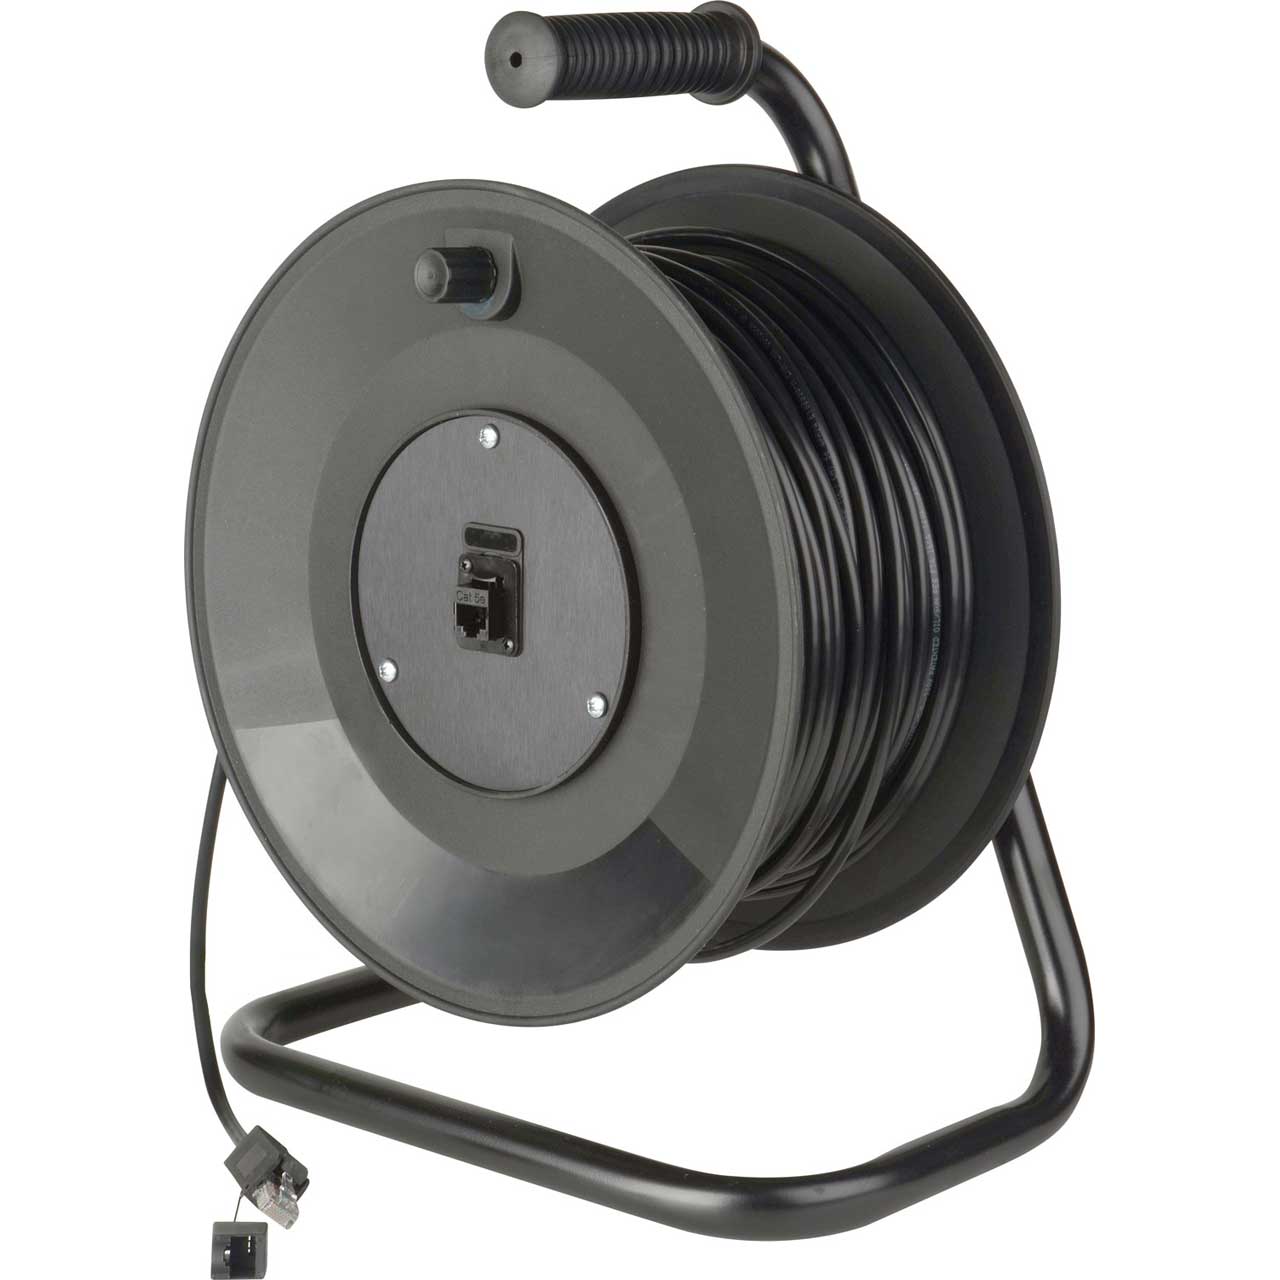 Jackreel Connect-N-Go Reel Belden 7923A Cat5e with Pro Shell